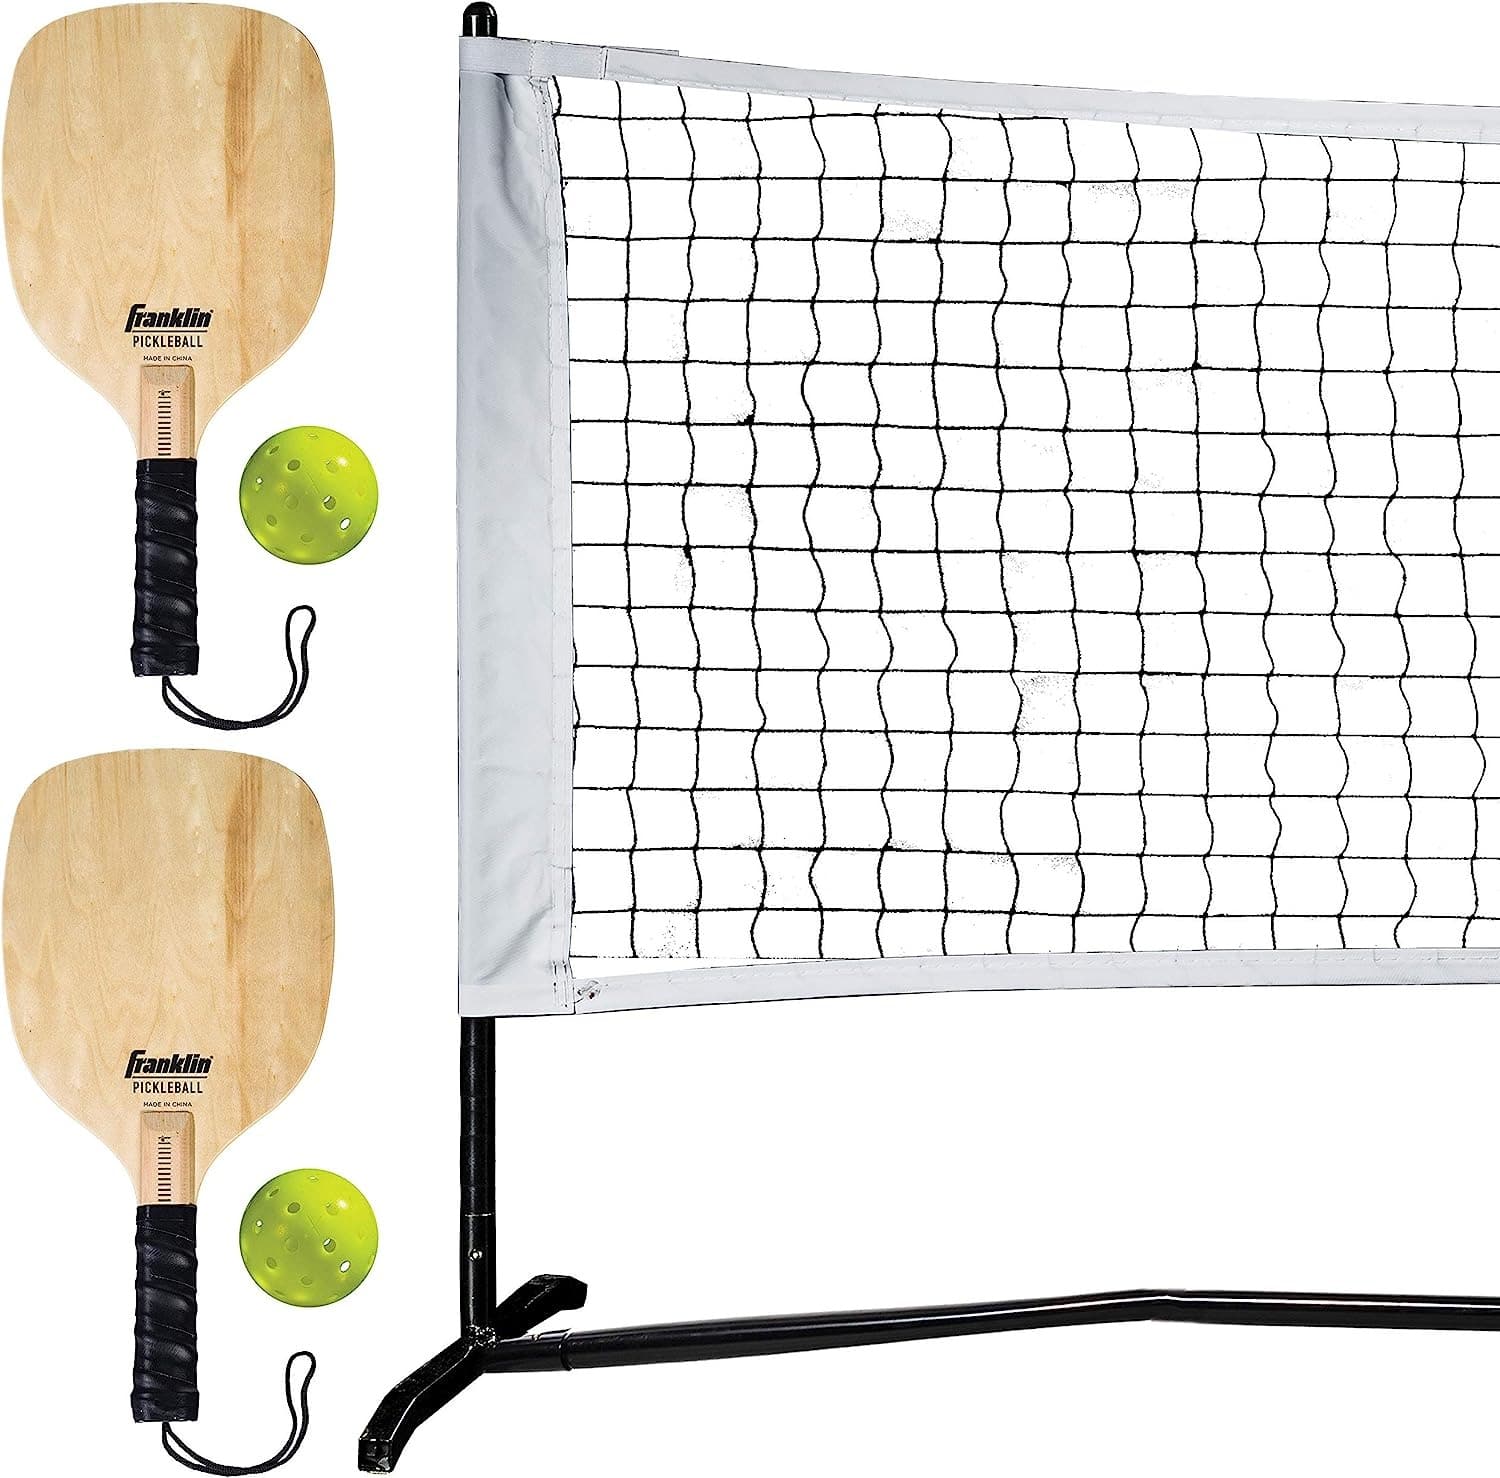 Two wooden pickleball paddles and balls next to the Franklin Sports pickleball net.